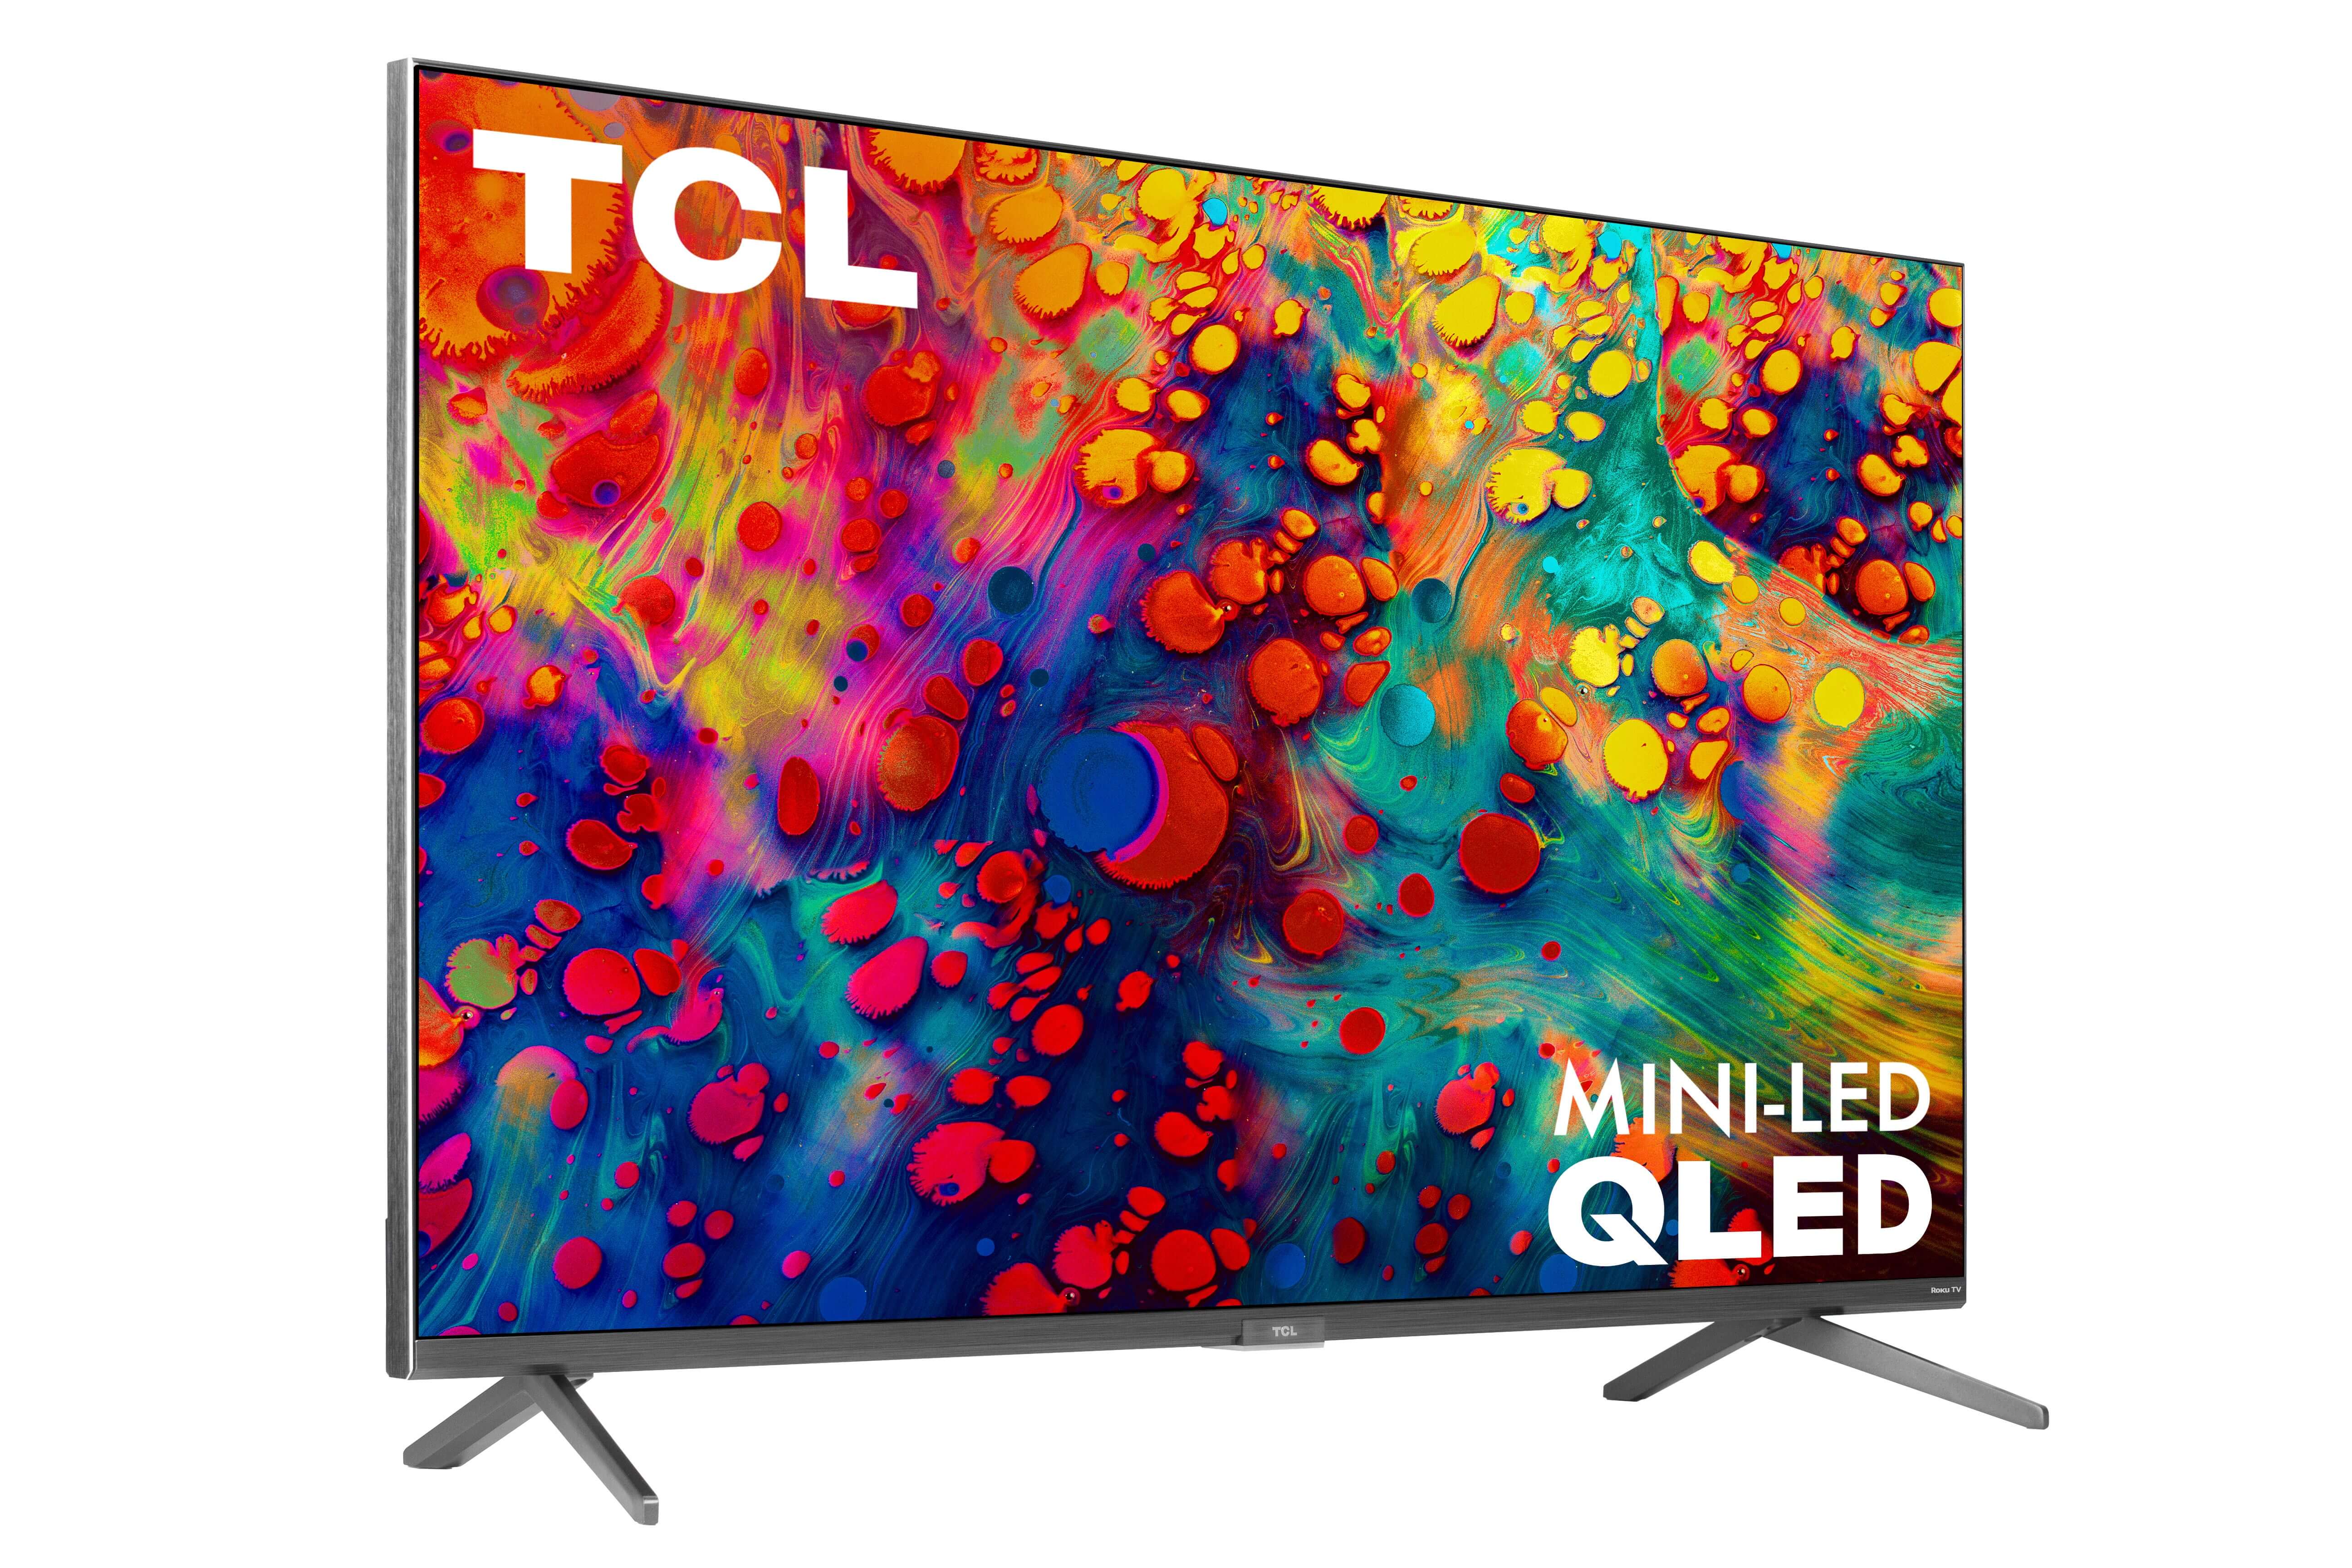 TCL 55" Class 6-Series 4K UHD Dolby Vision HDR QLED Roku Smart TV - 55R635 - image 3 of 16